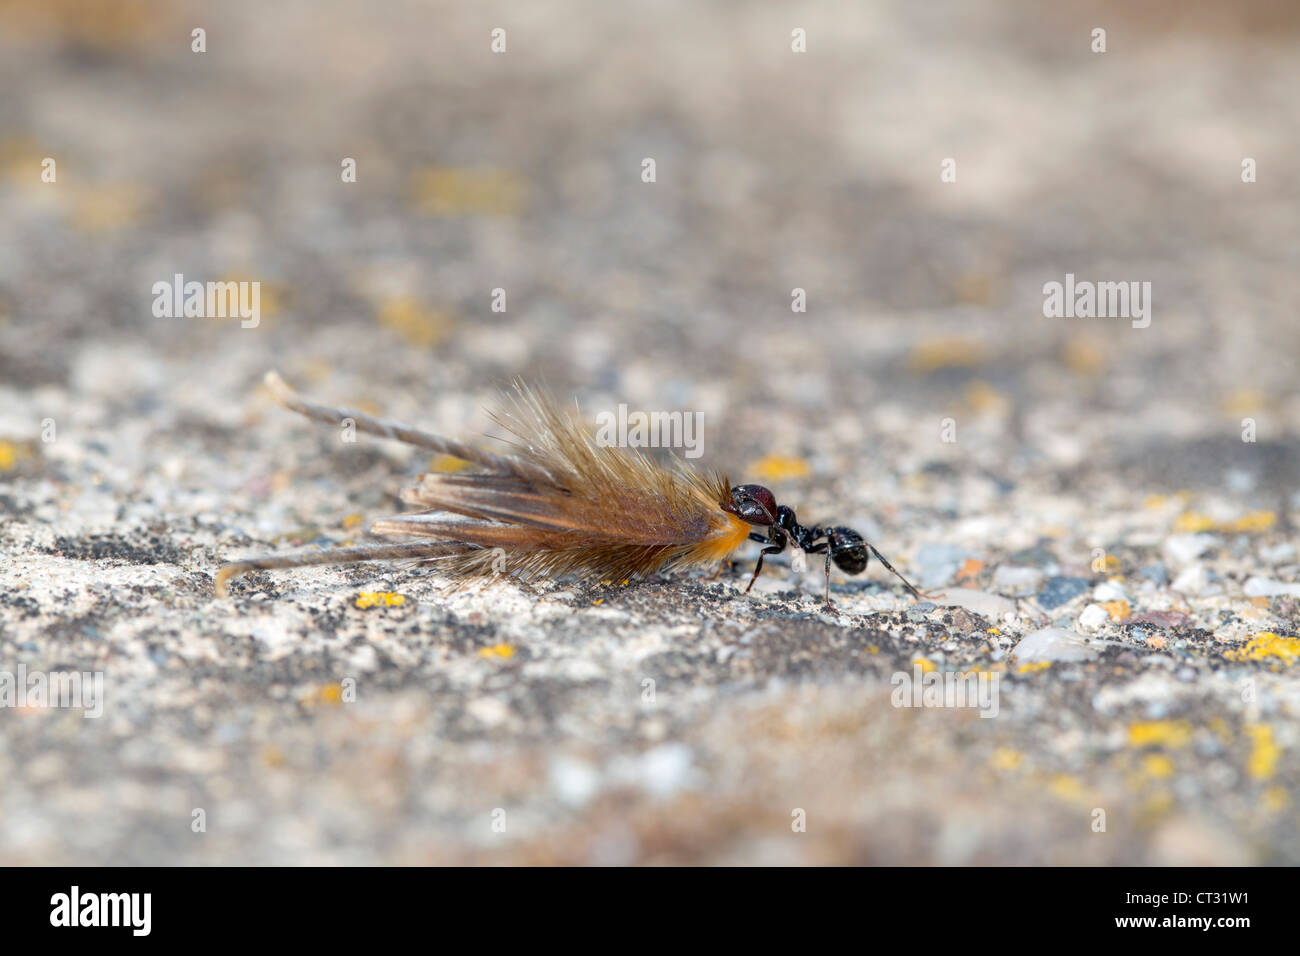 Ant with Wheat Husk; Spain Stock Photo